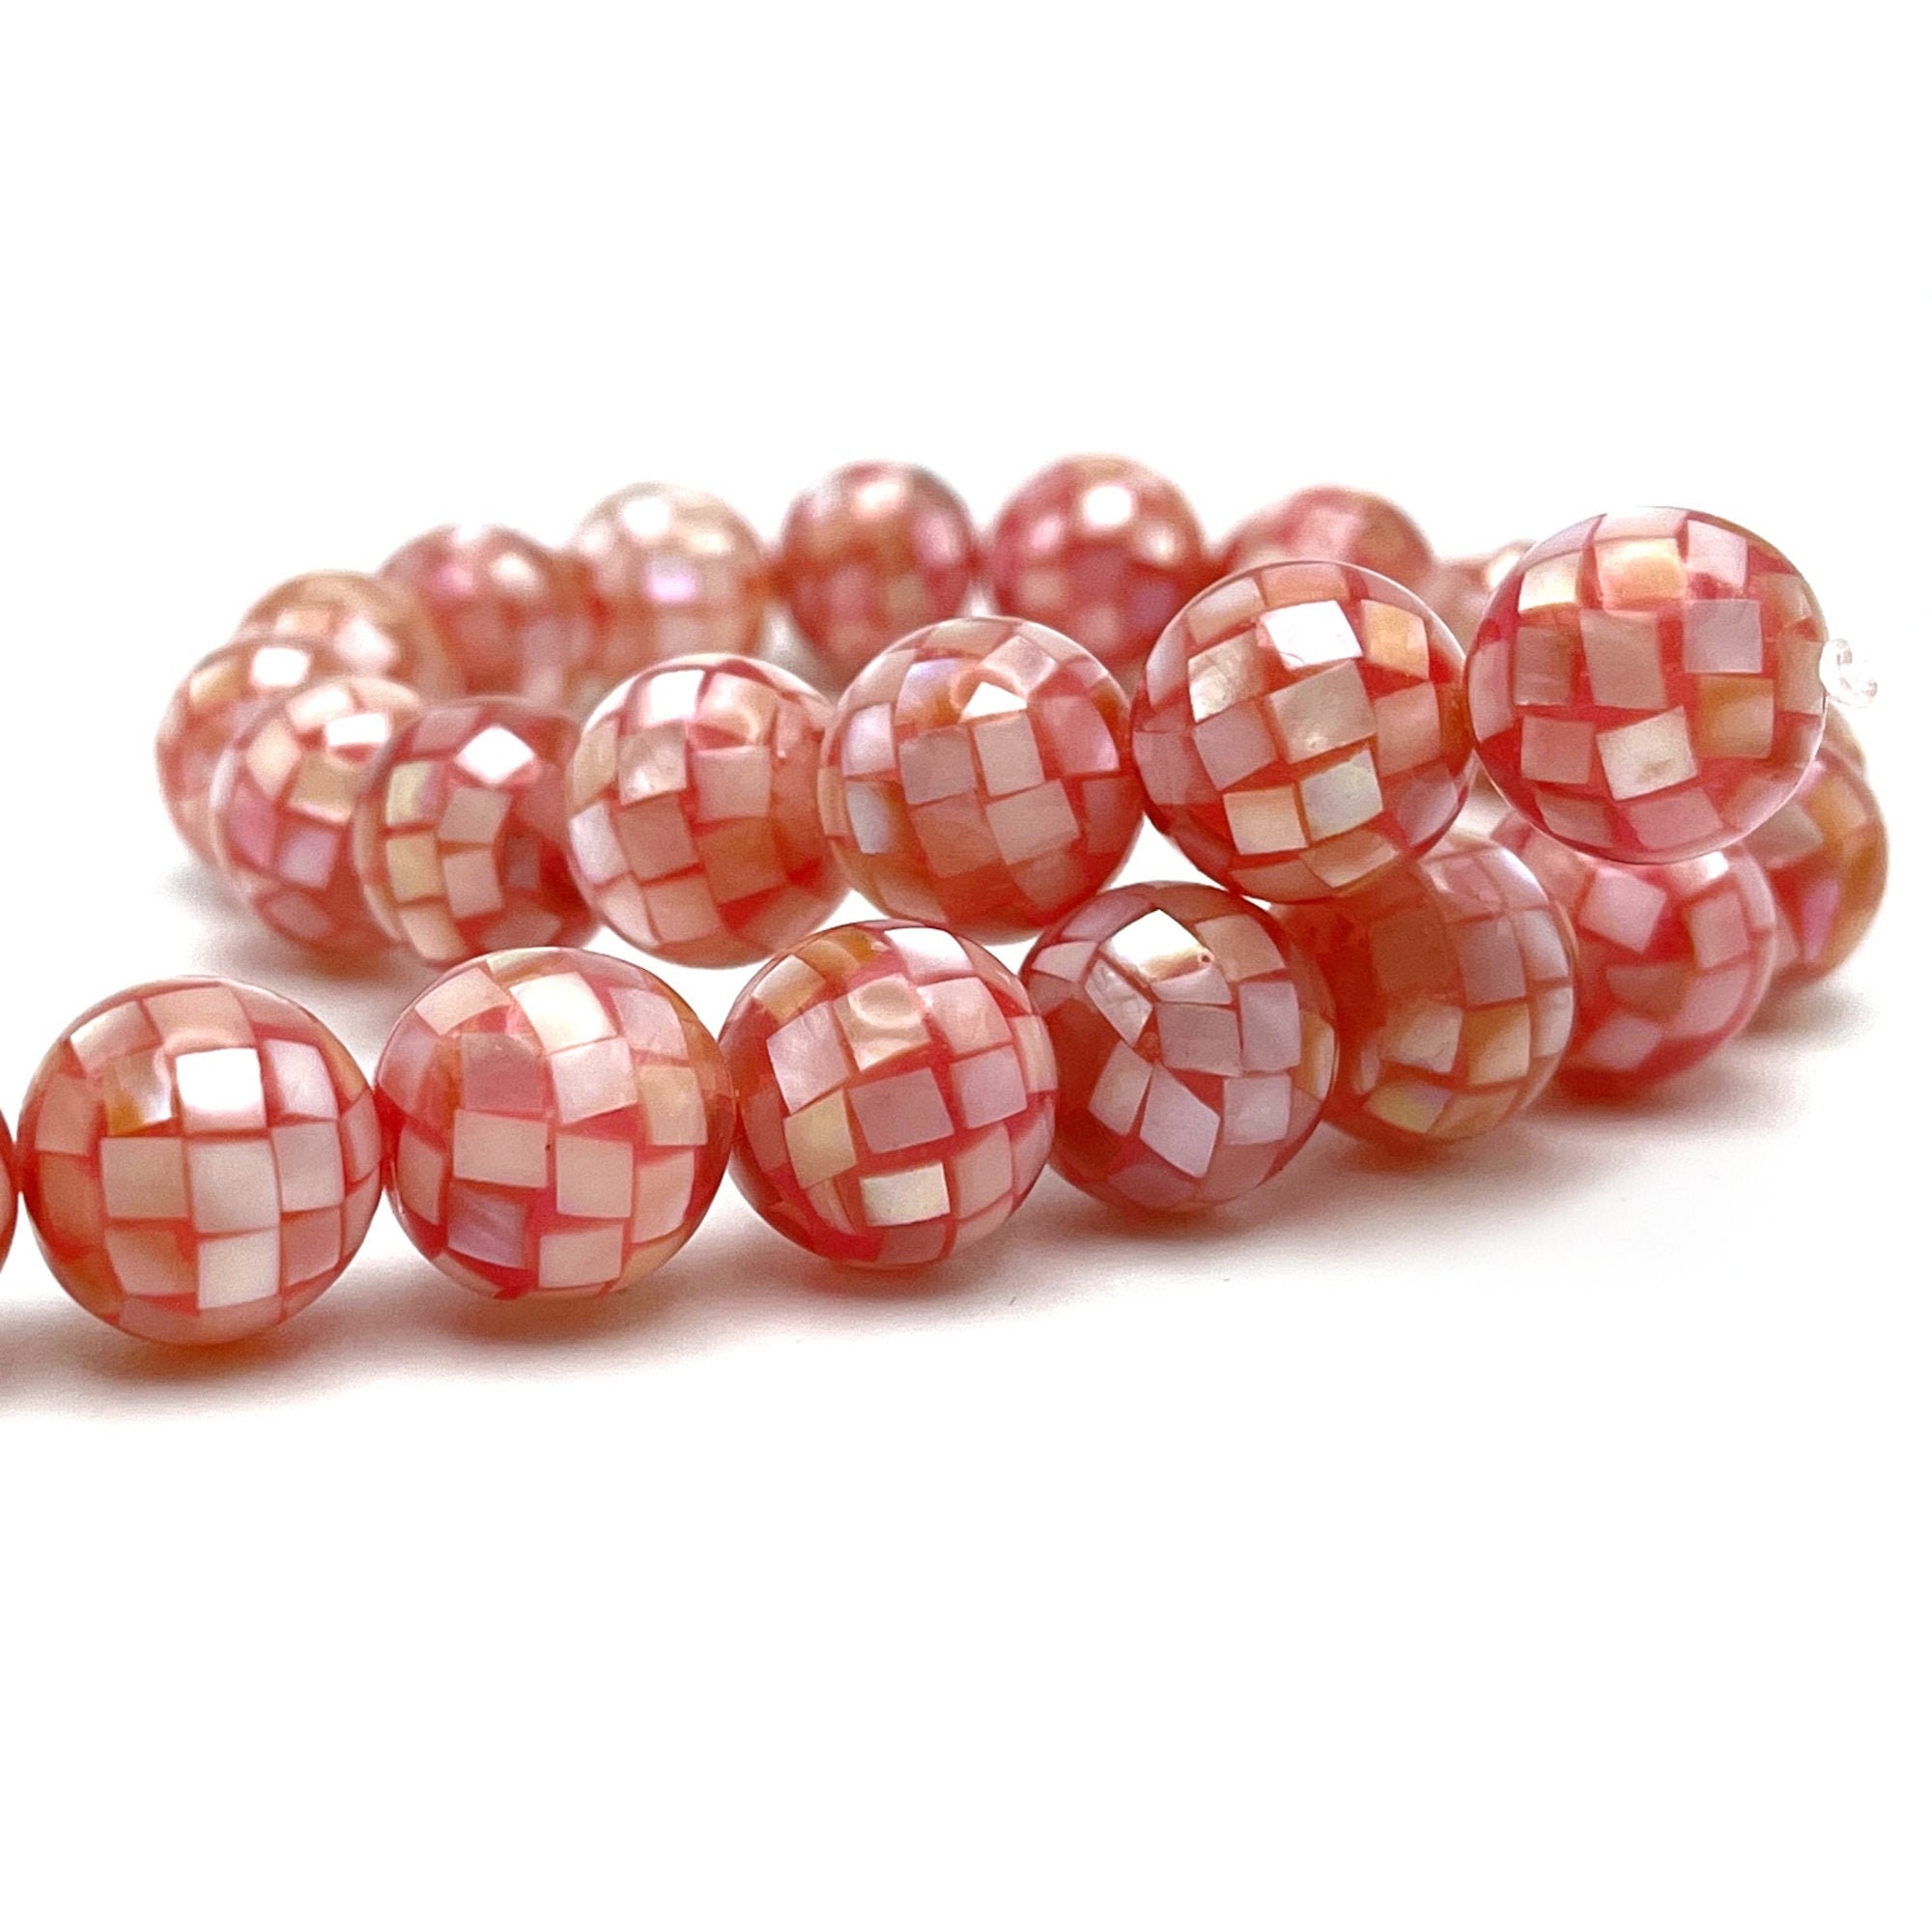 2 Pieces Conch Shell Mosaic Round Beads in 14mm 1048SABM